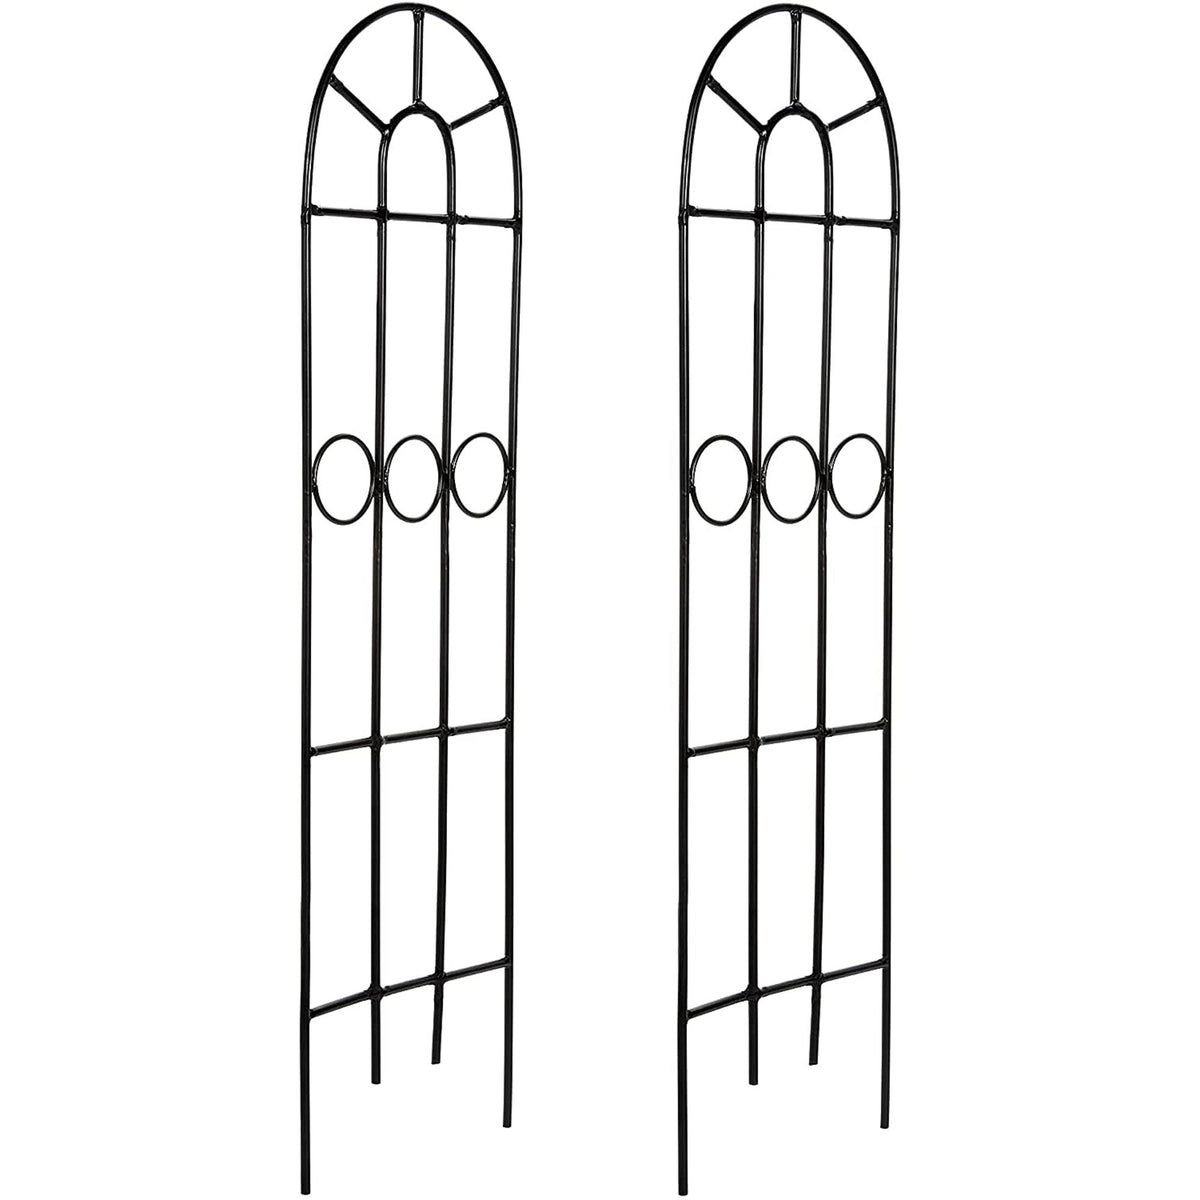 HOSLEY®  Iron Classic Trellis, Set of 2, 27 inches High each